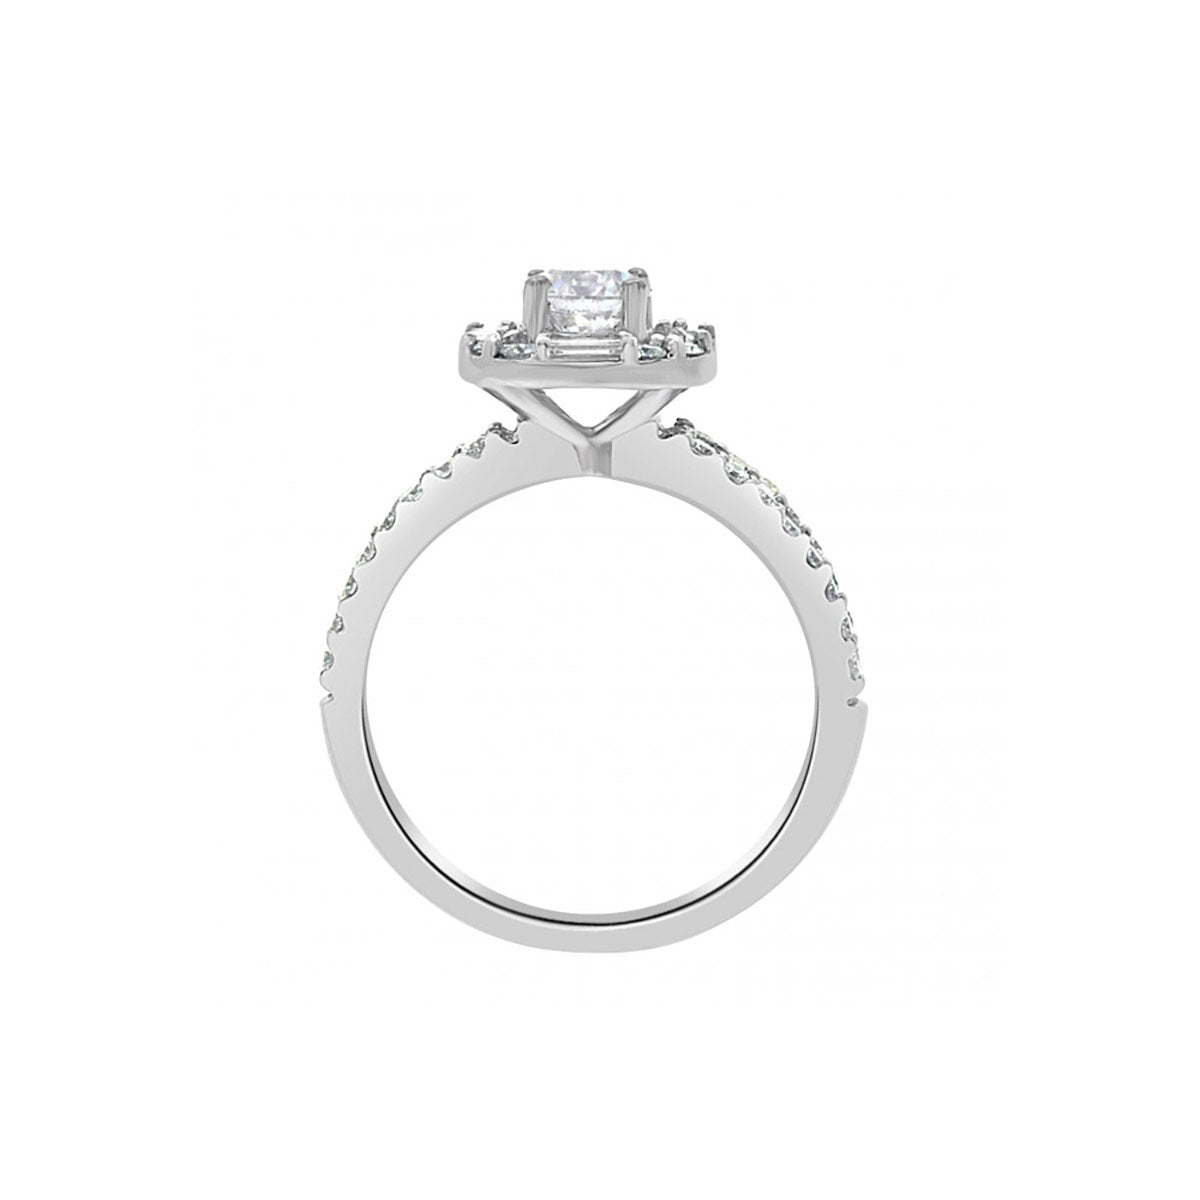 Baguette and Round Diamond Engagement Ring in white gold IN A UPRIGHT POSITION